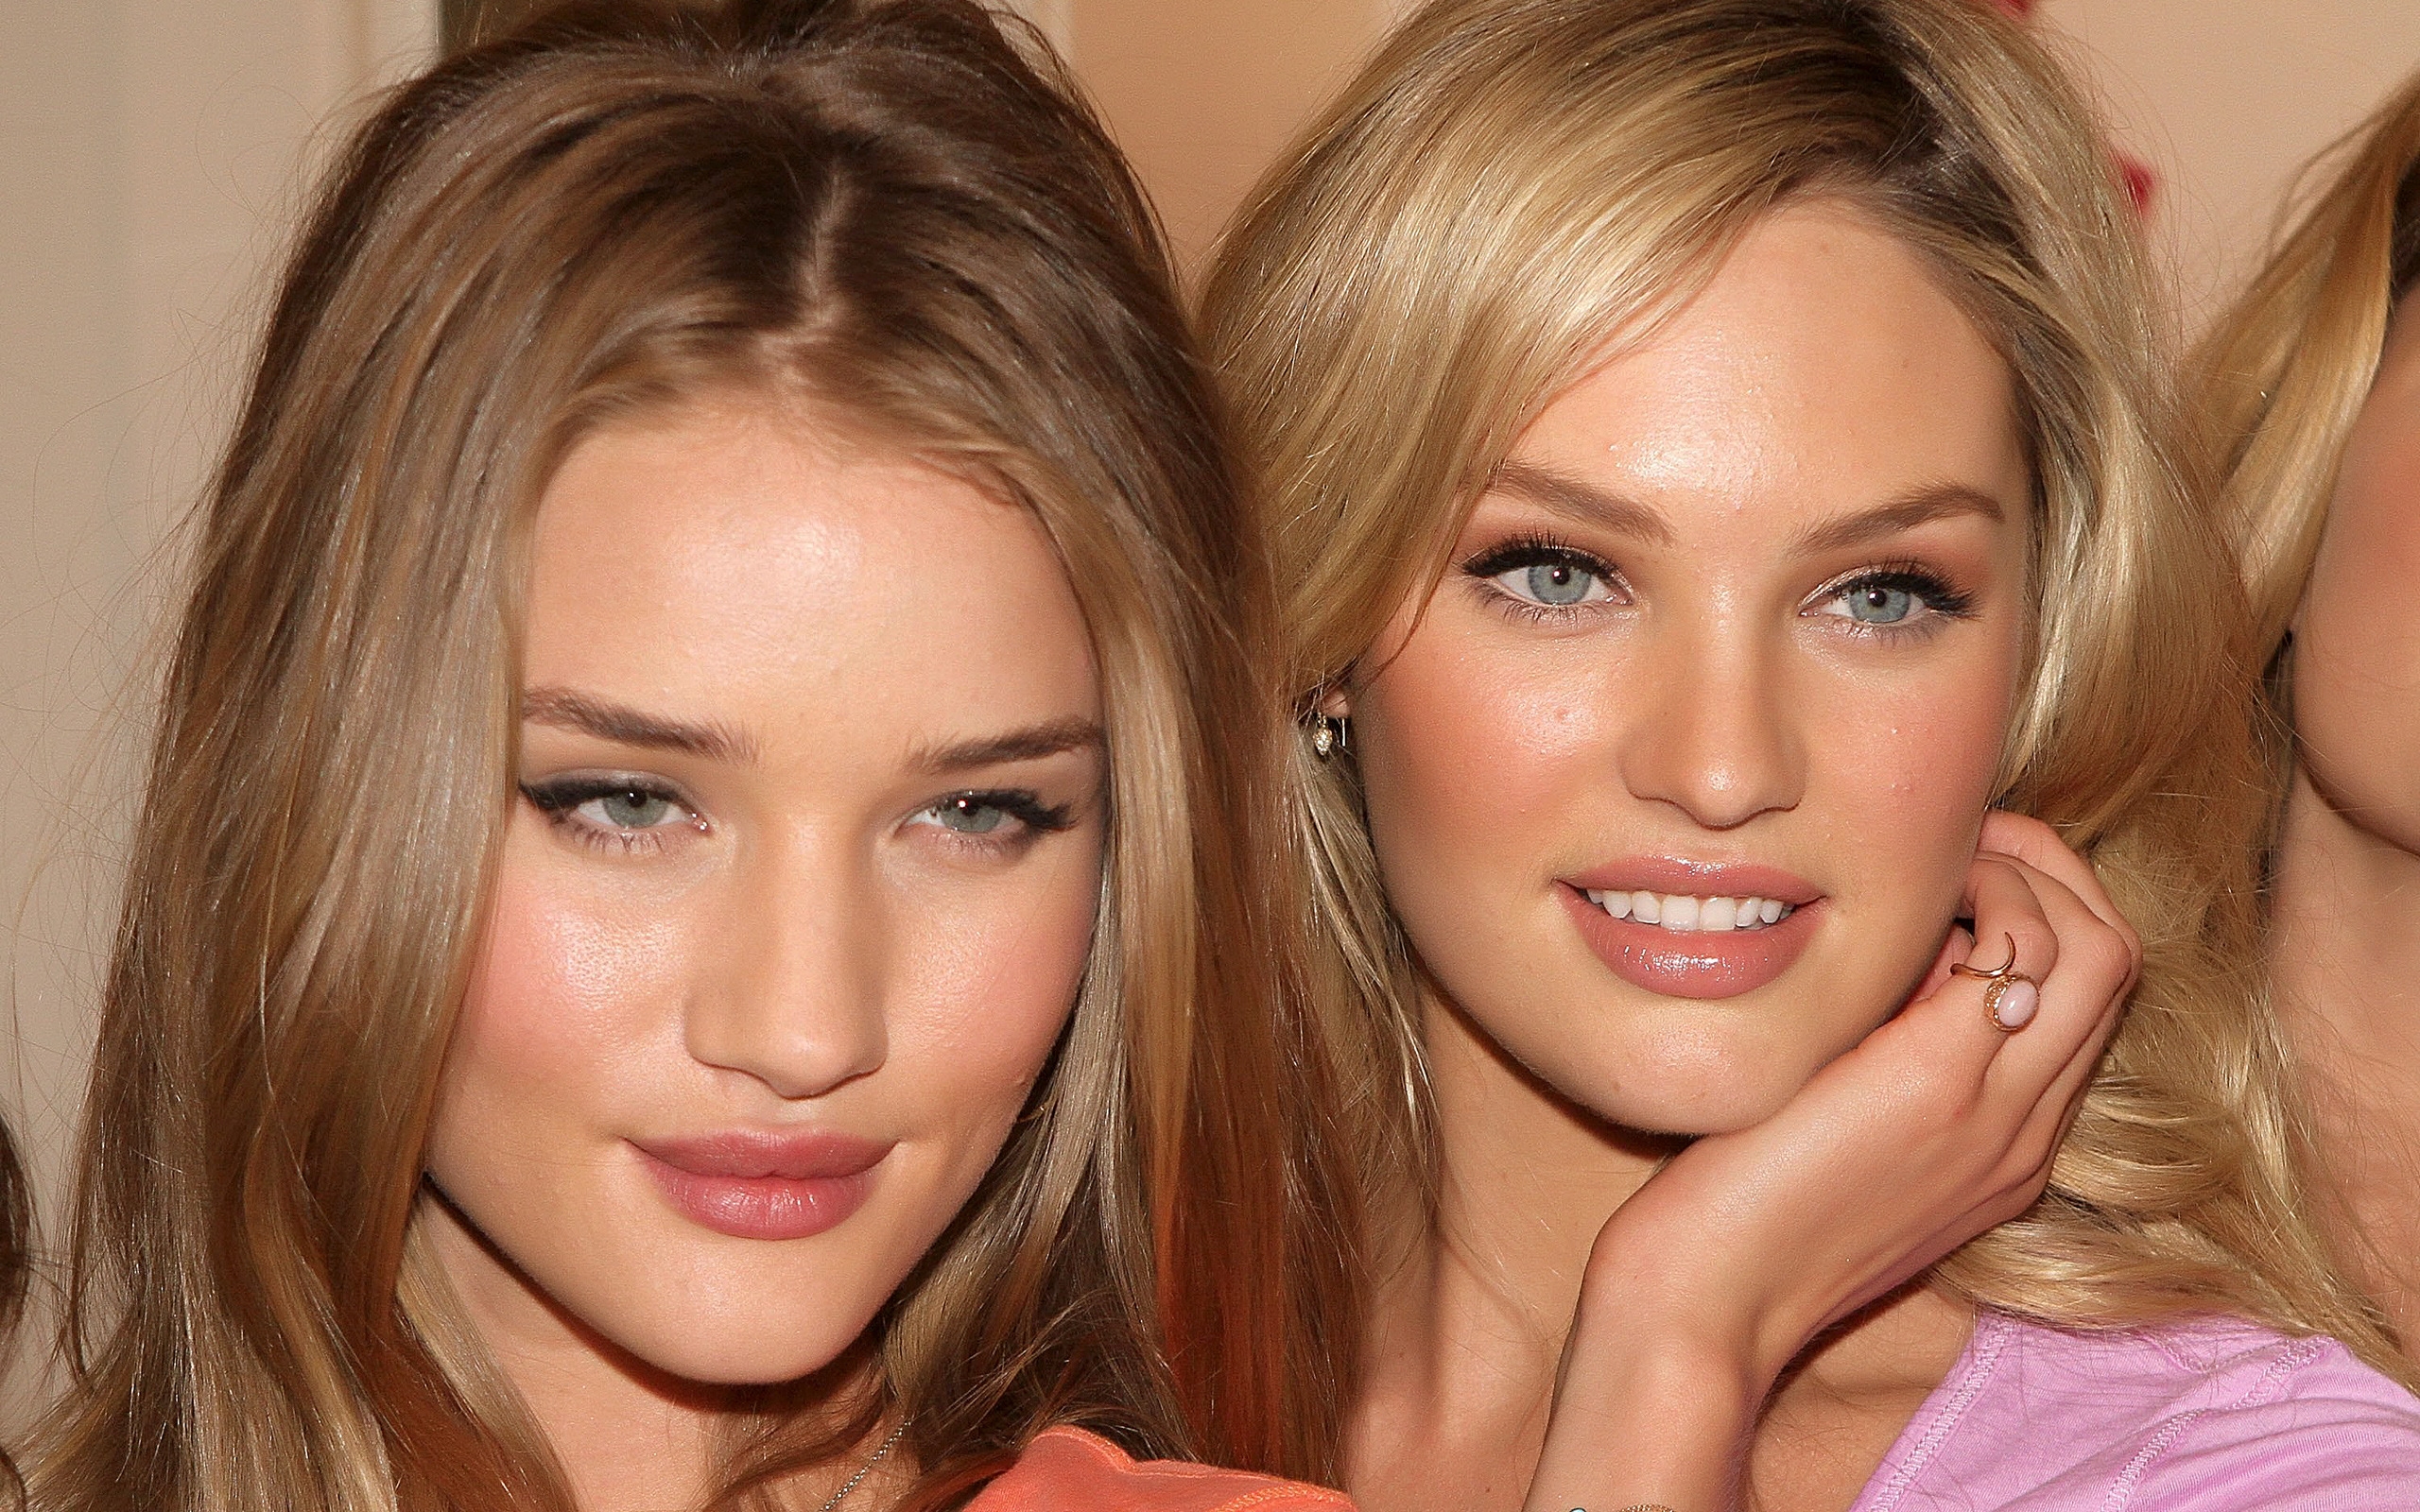 Rosie and Candice for 2560 x 1600 widescreen resolution